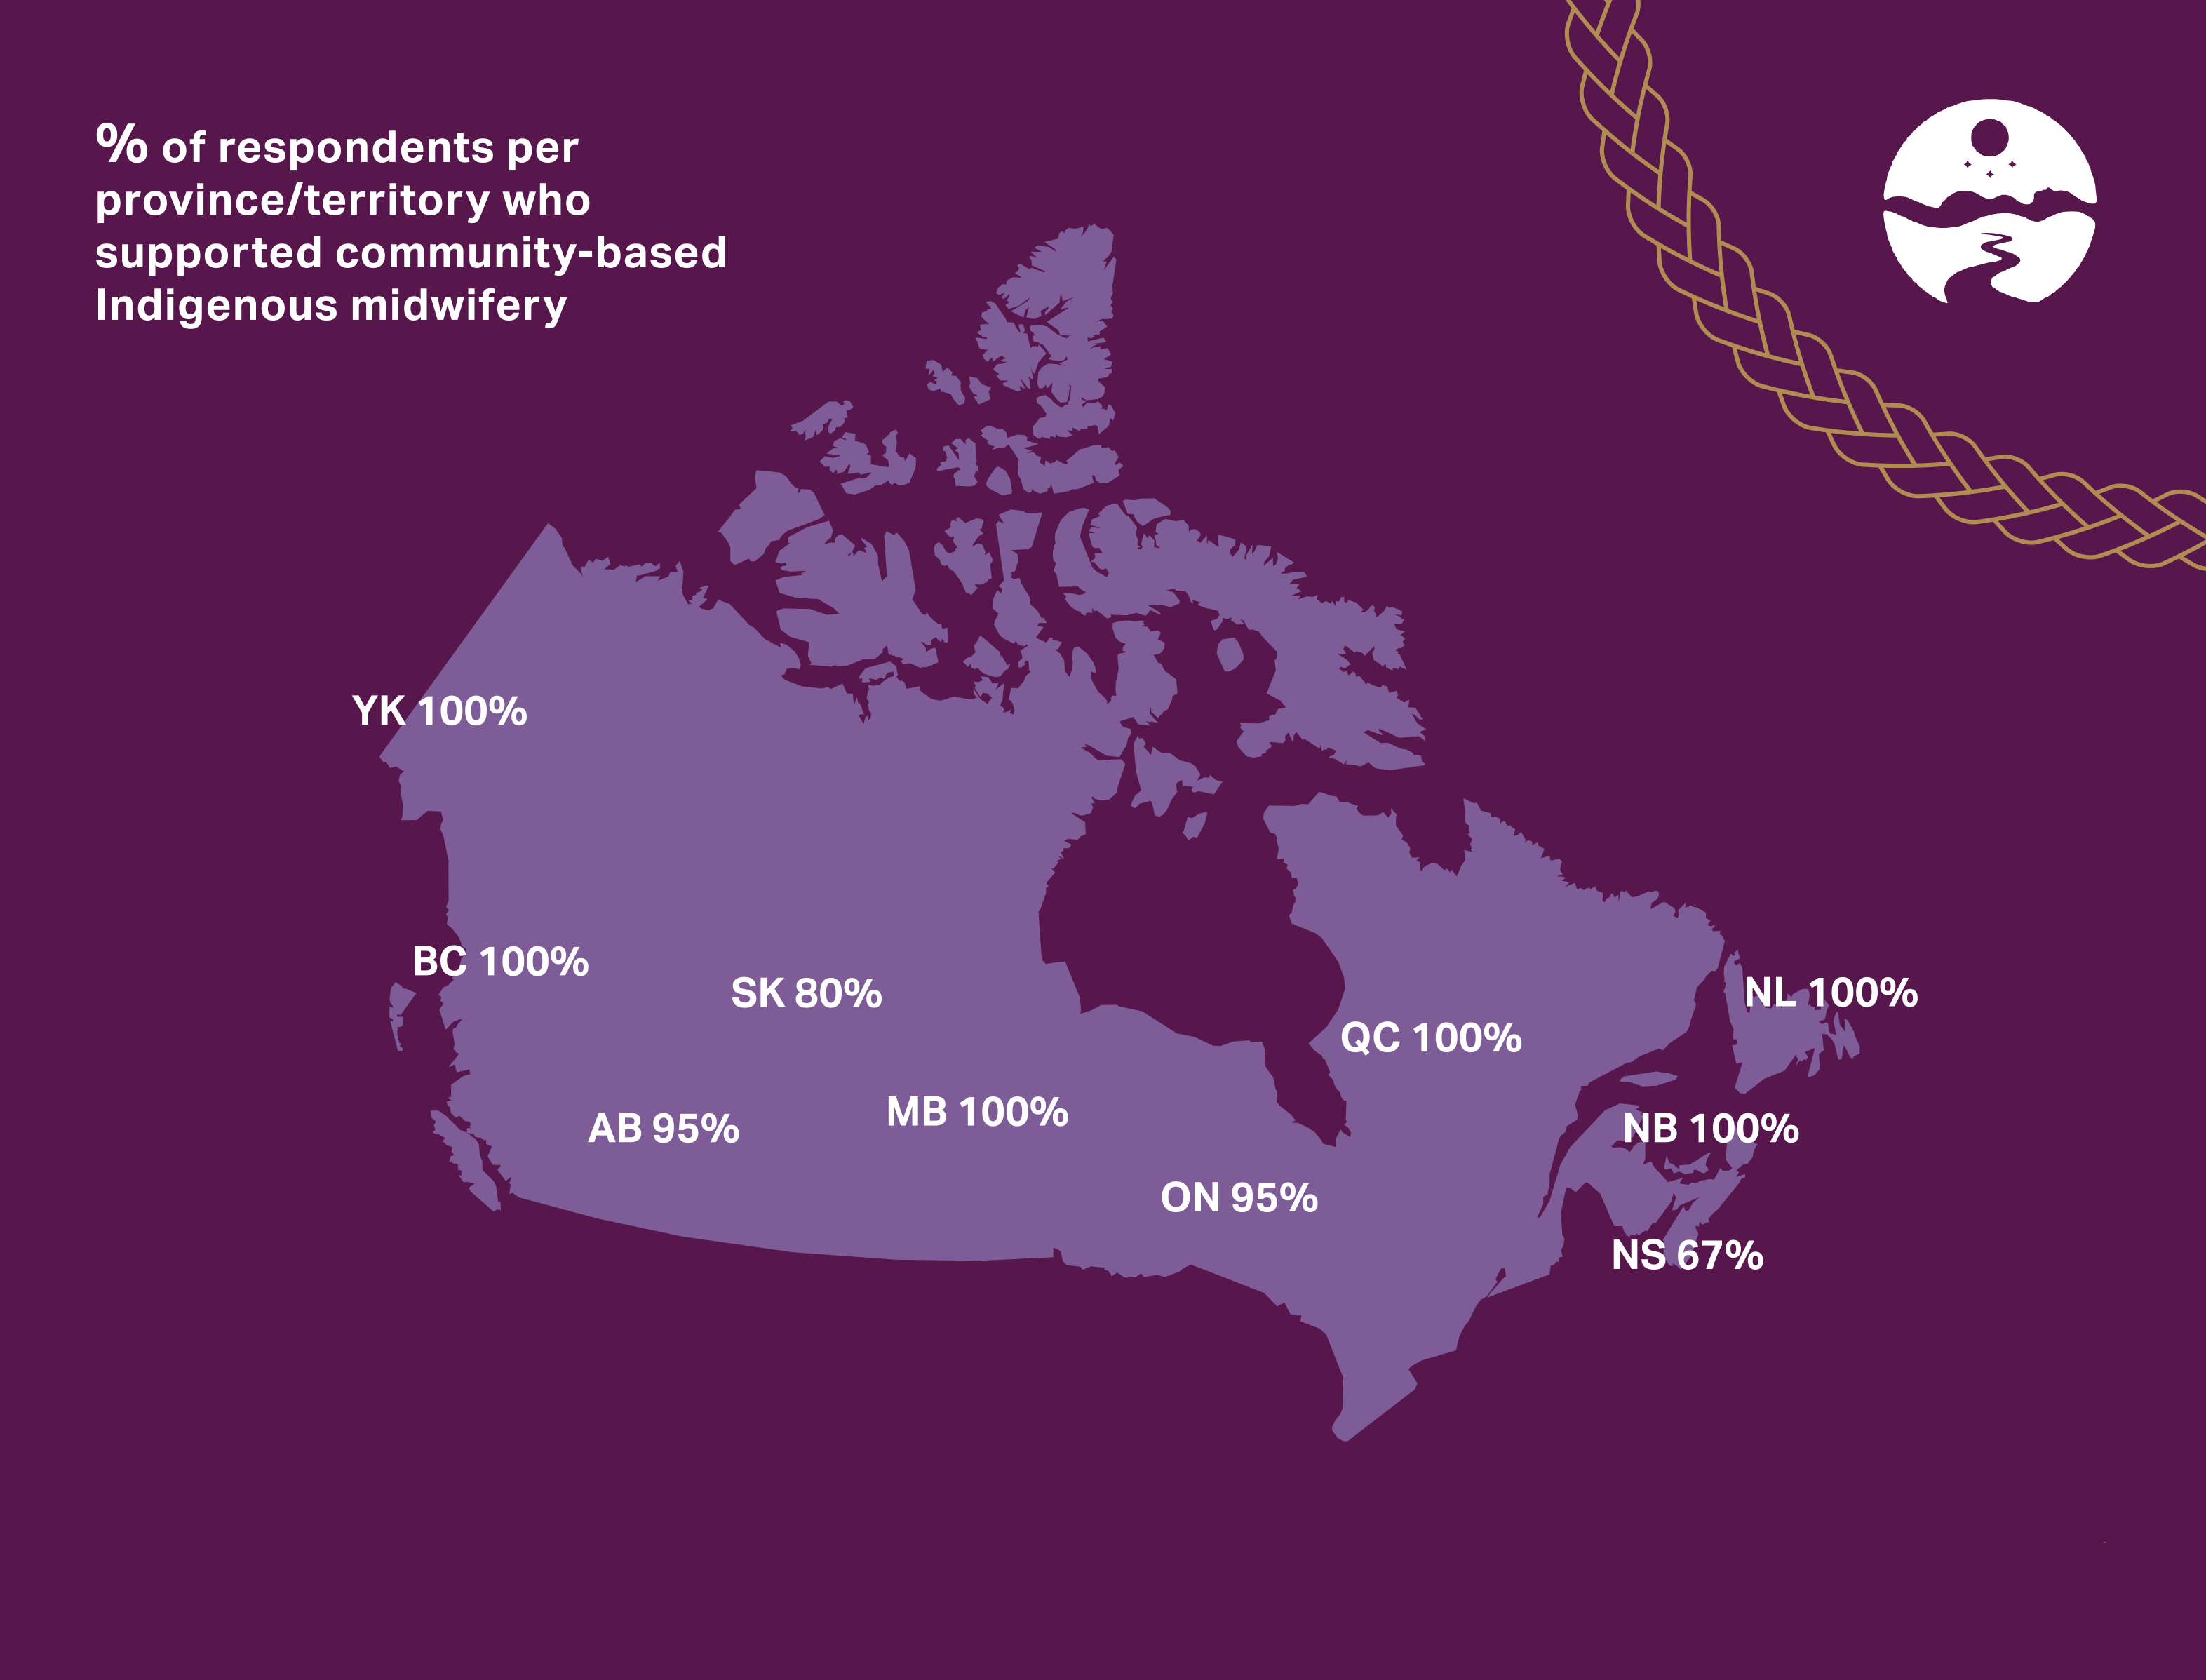 A map of Canada on a deep purple background. The title reads: % of respondents per province/territory who supported community-based Indigenous midwifery. Percentage labels per province: YK 100%, BC 100%, AB 95%, SK 80%, MB 100%, ON 95%, QC 100%, NS 67%, NB 100%, NL 100%